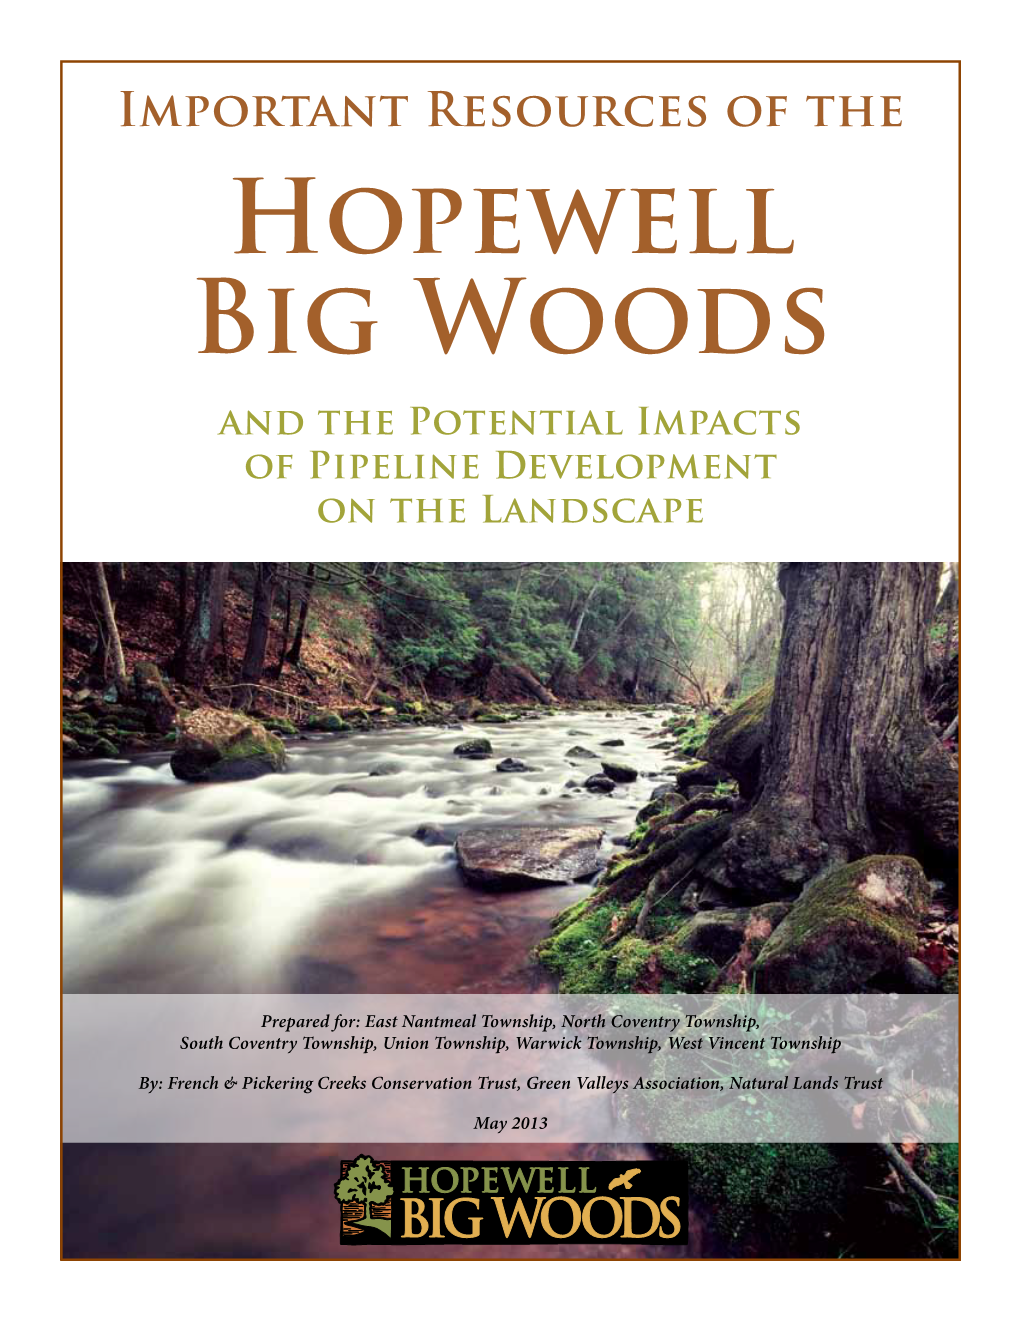 Hopewell Big Woods and the Potential Impacts of Pipeline Development on the Landscape